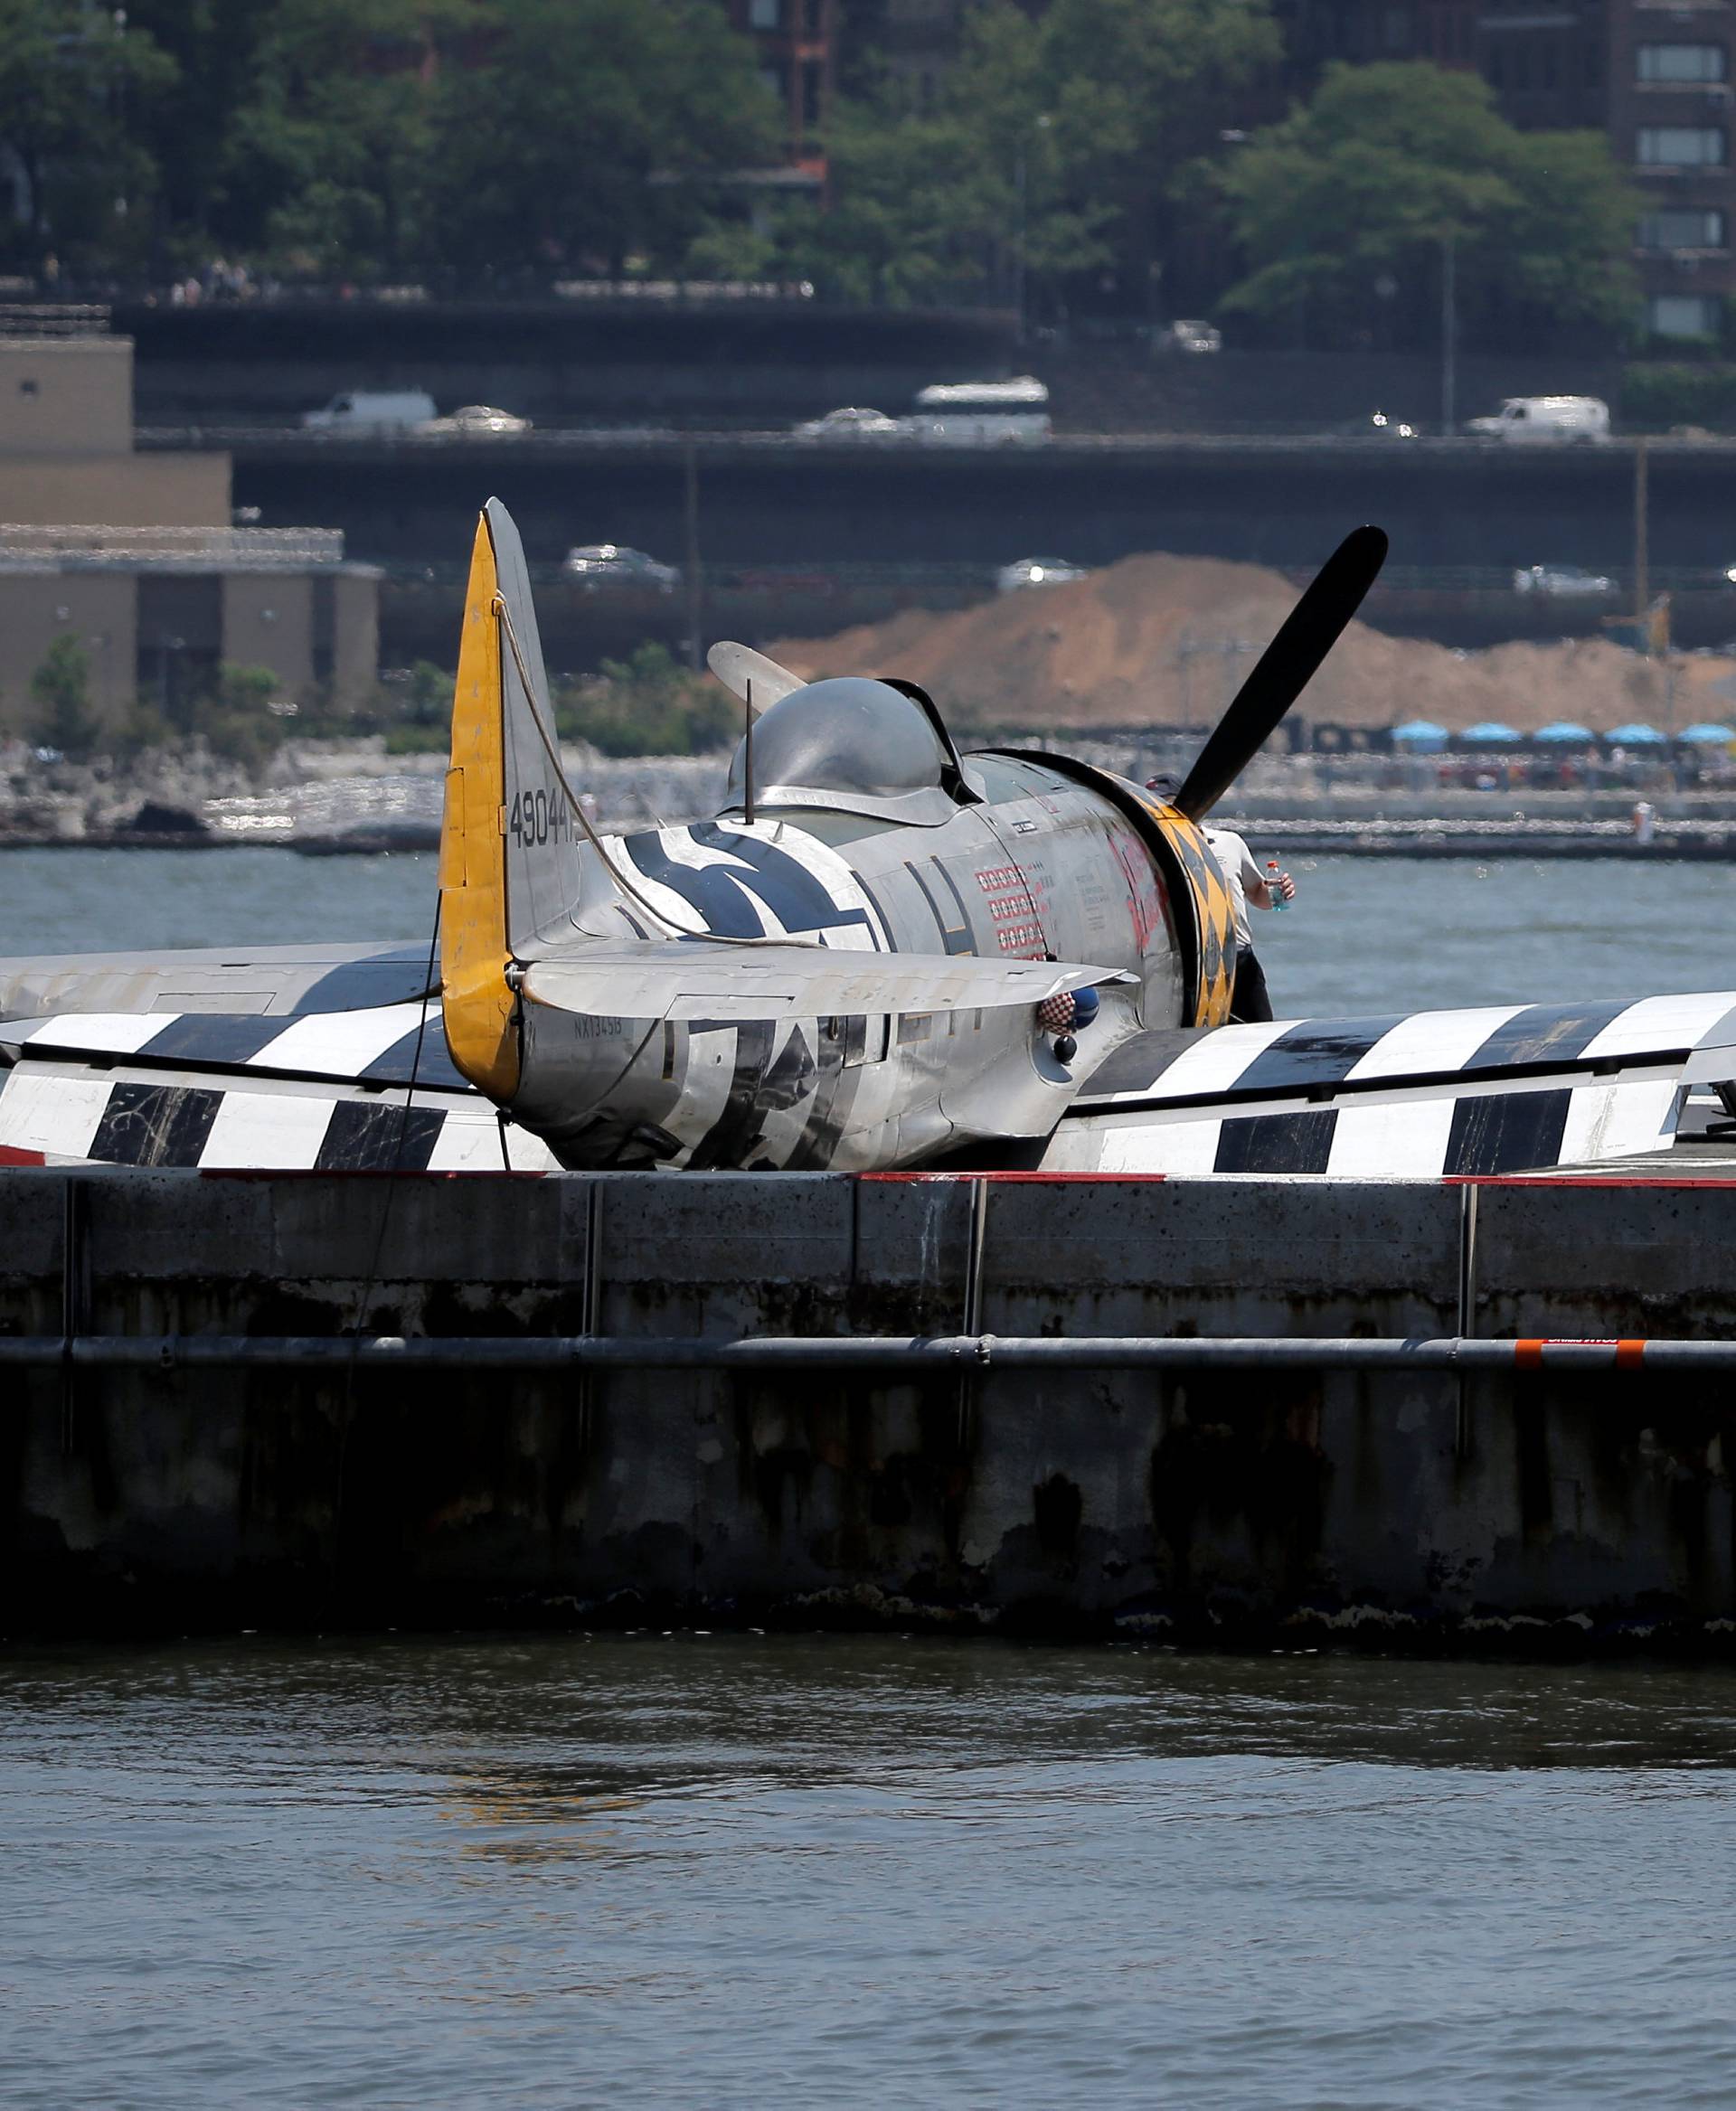 FAA investigators look over the wreckage of a vintage P-47 Thunderbolt airplane that crashed in the Hudson River in New York